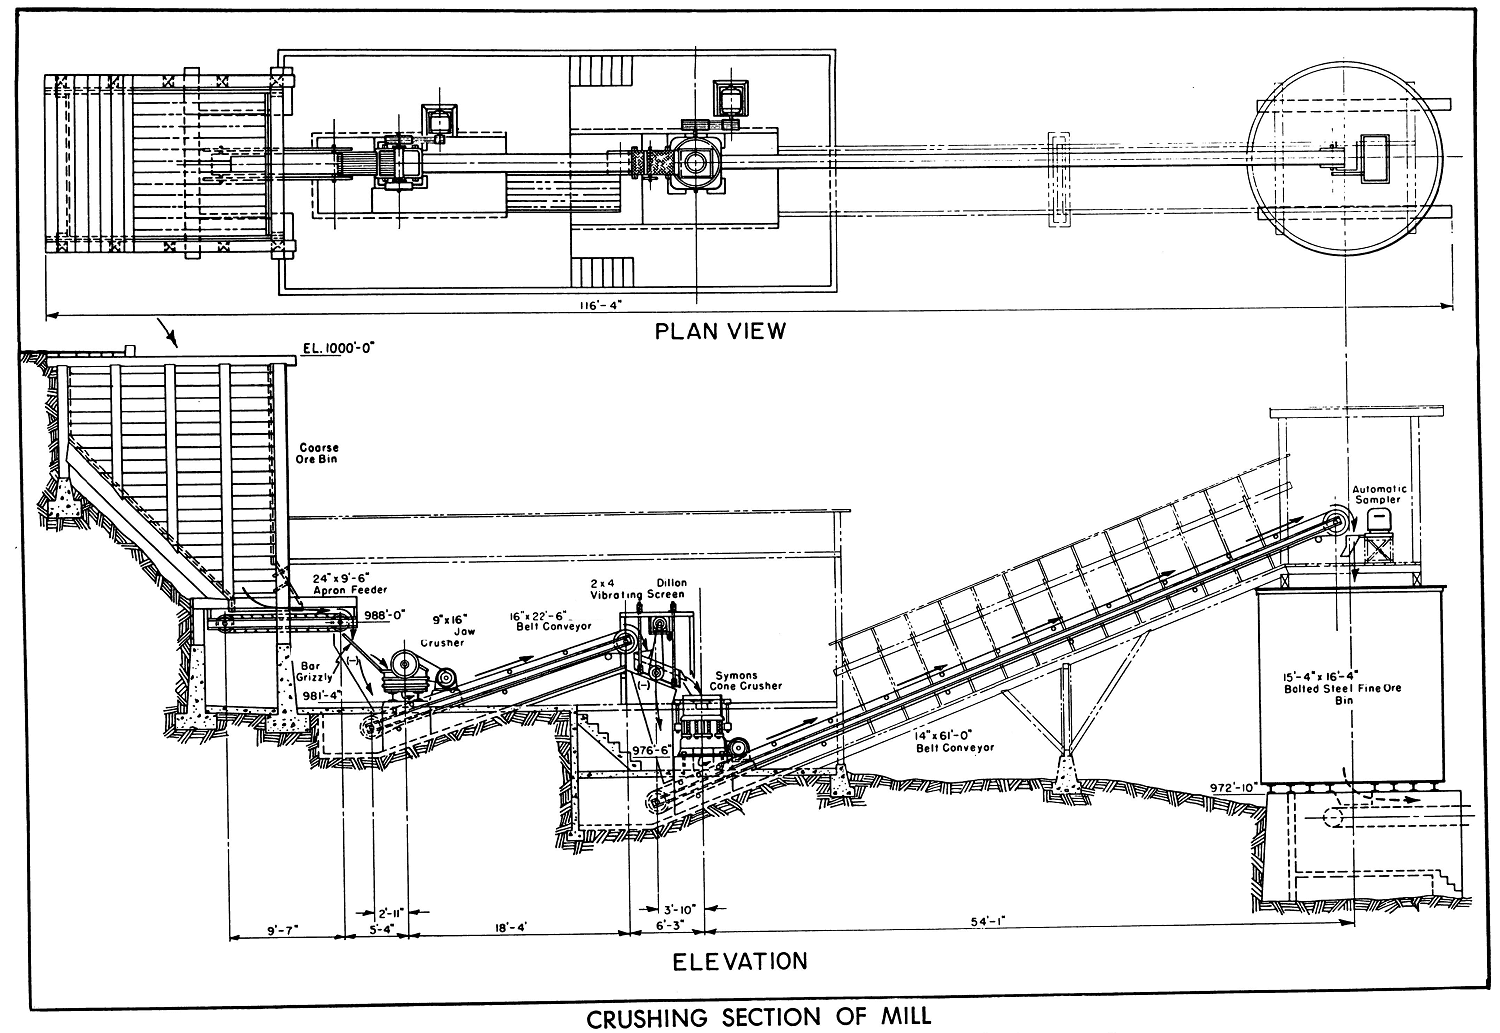 Crushing Section of Mill